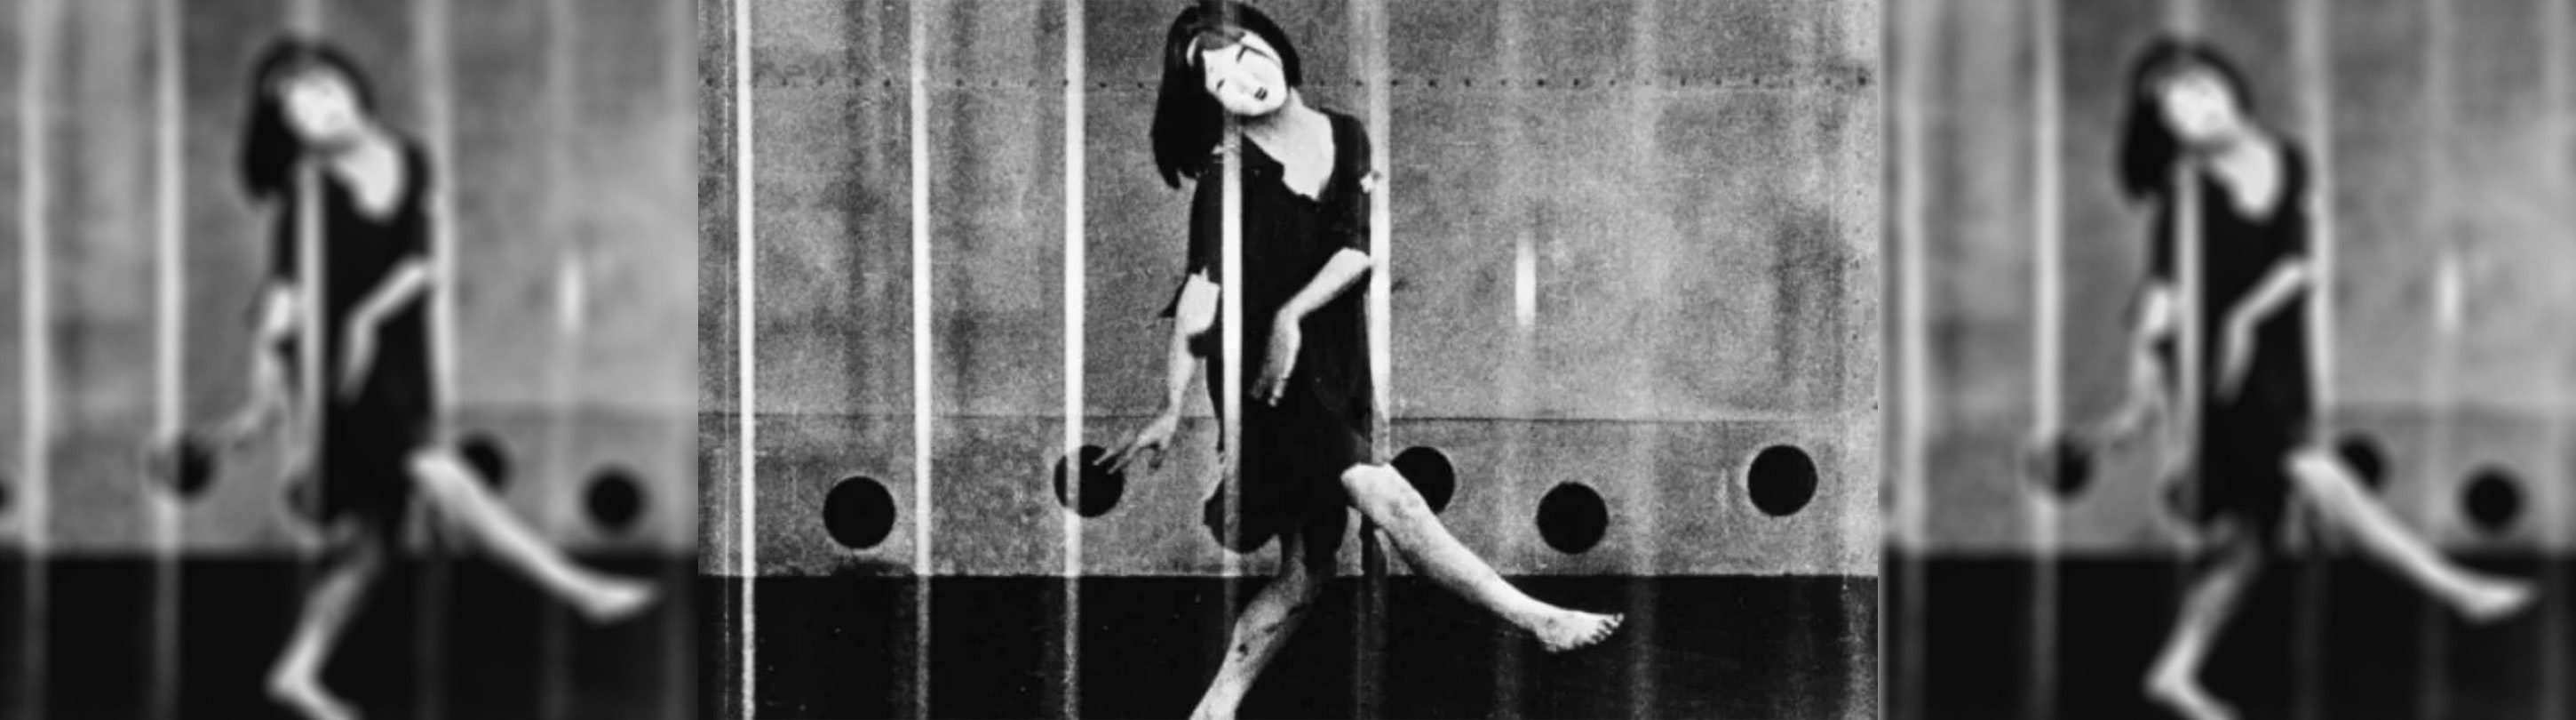 A black and white photo of a woman dancing on stage wearing a Japanese still mask